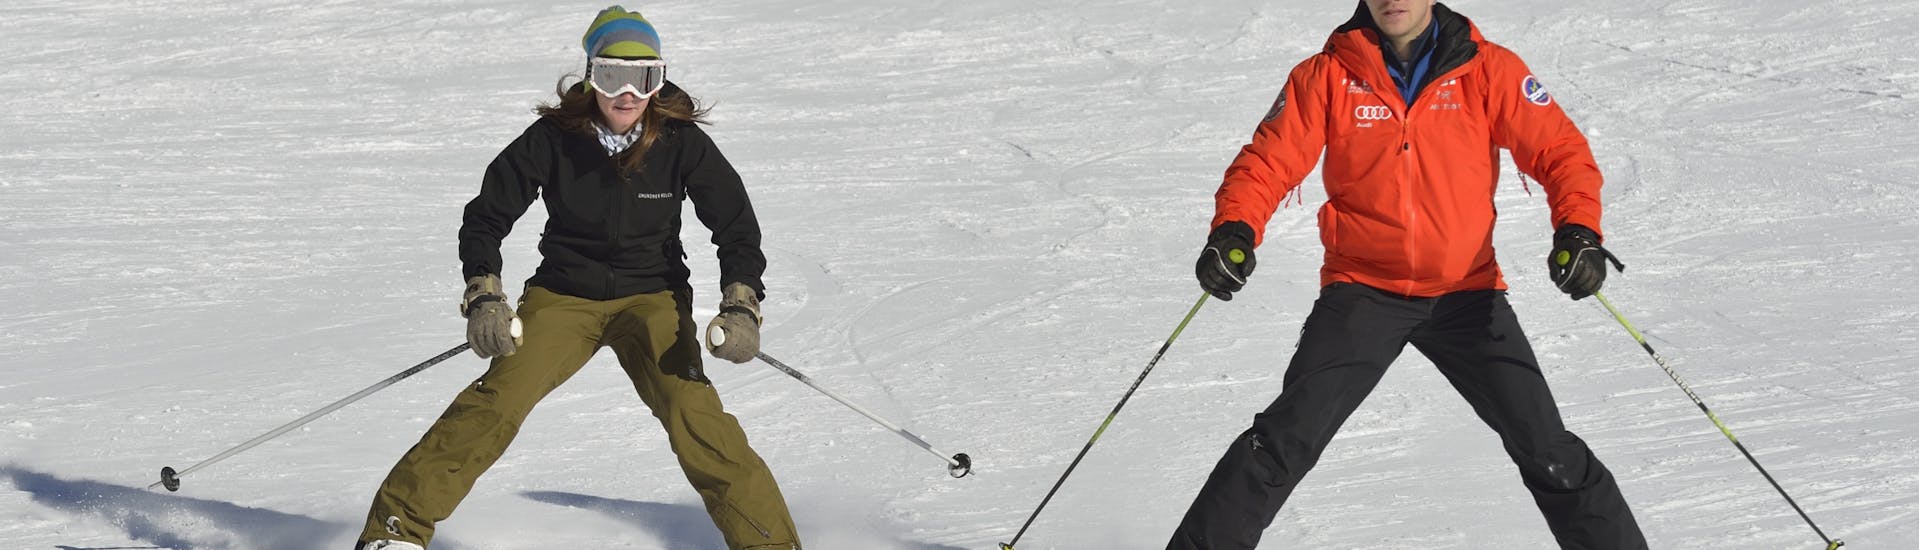 An adult and a ski instructor during the Adult Ski Lessons for First Timers.